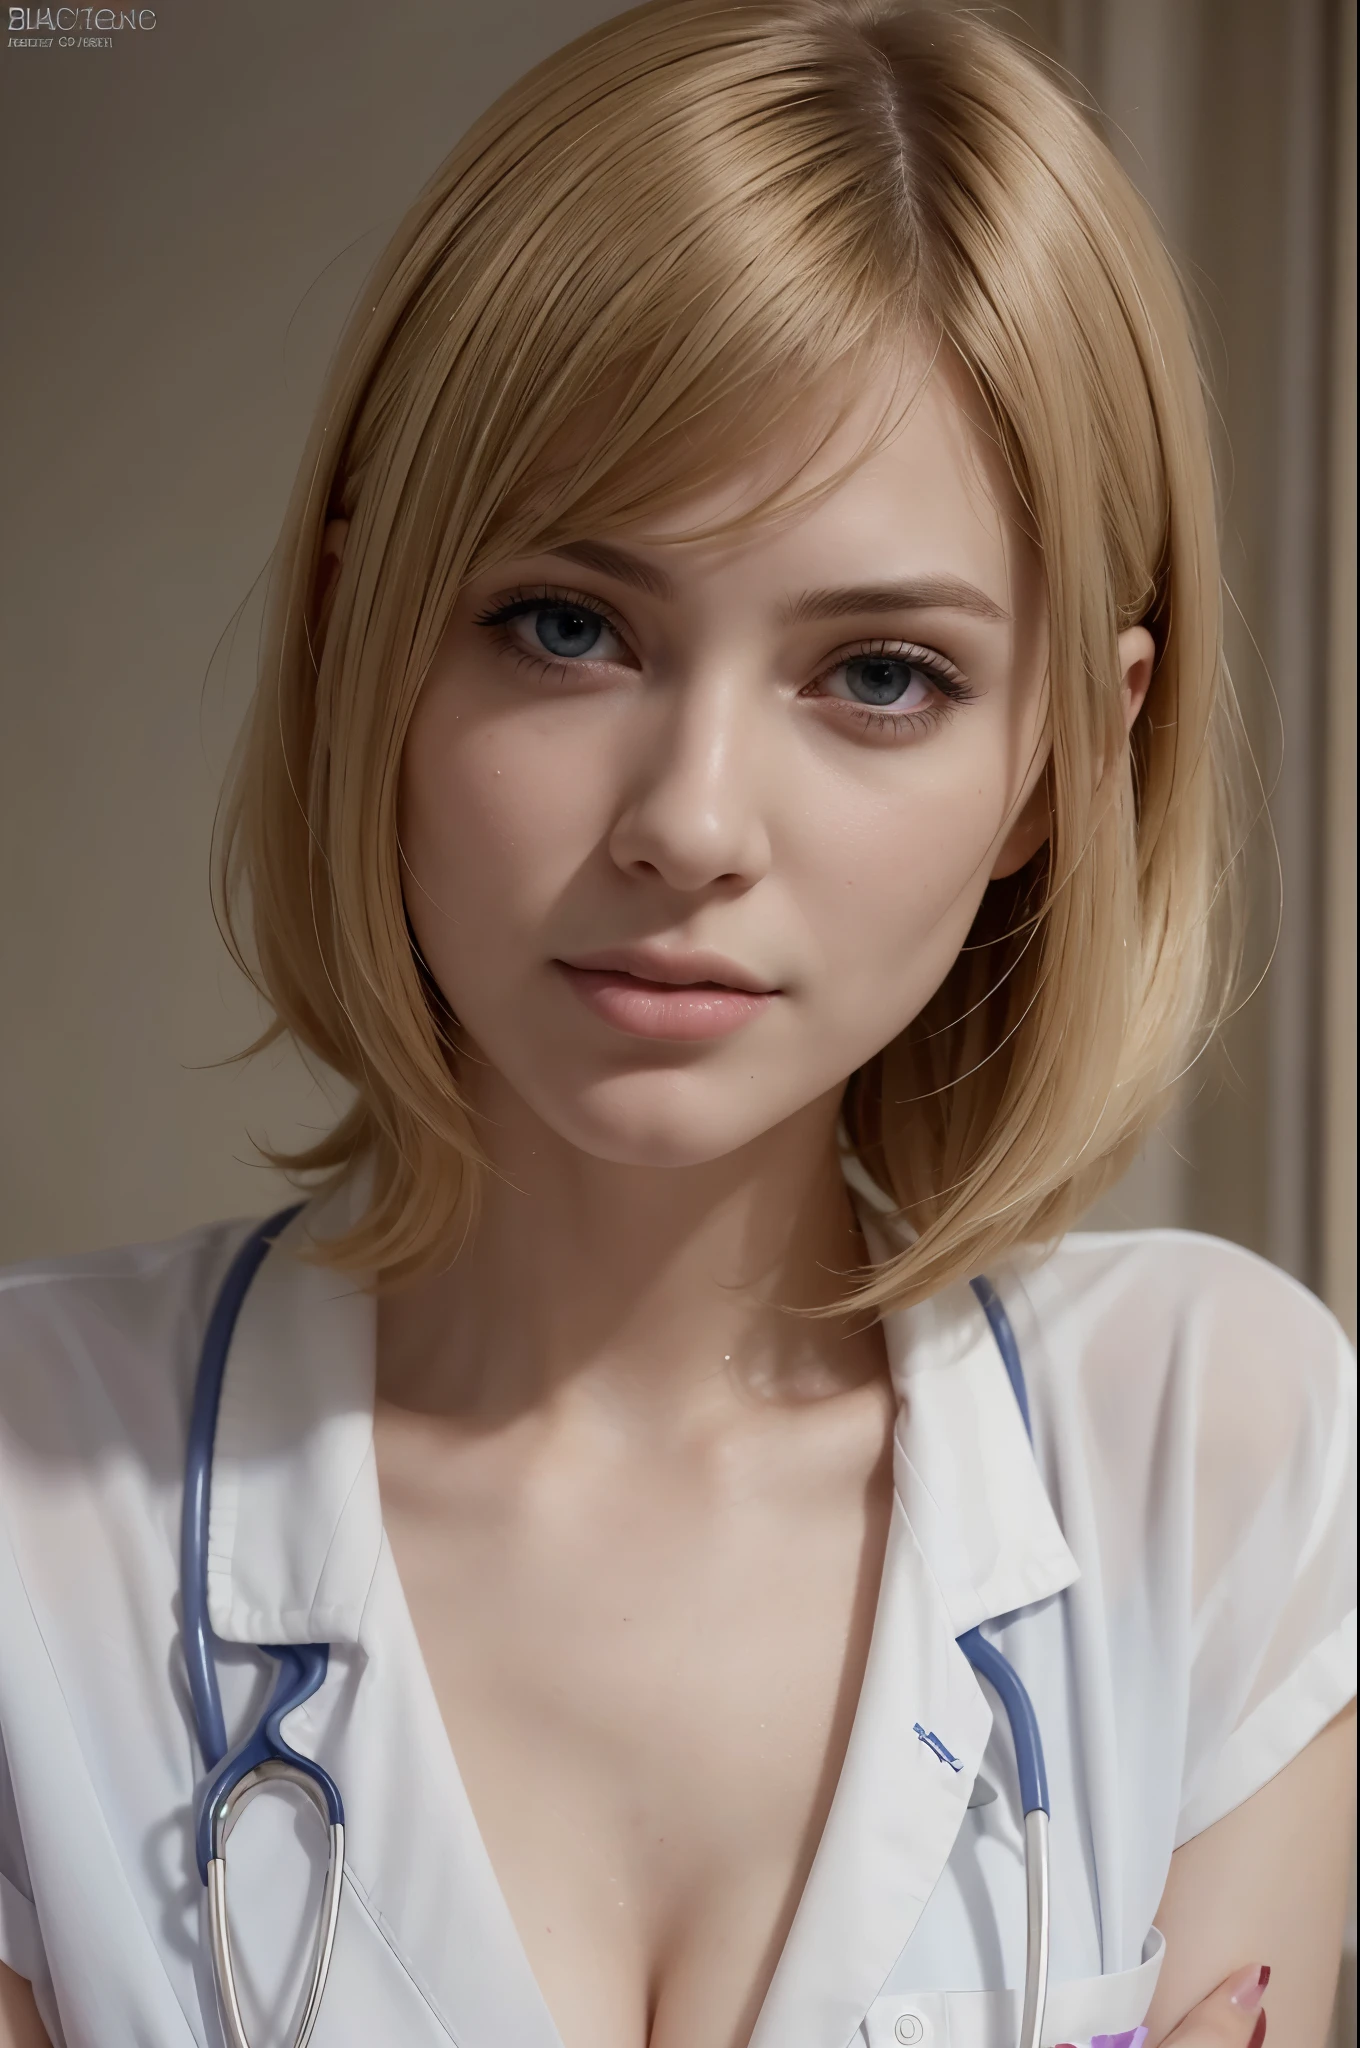 masterpiece, best quality, extremely detailed, hyperrealistic, photorealistic, a beautiful 20s french model, doctor, hospital:1.1, doctor uniform:1.1, ultra detailed face, with bangs, blonde hair, pale skin, busty breasts, tongue out

